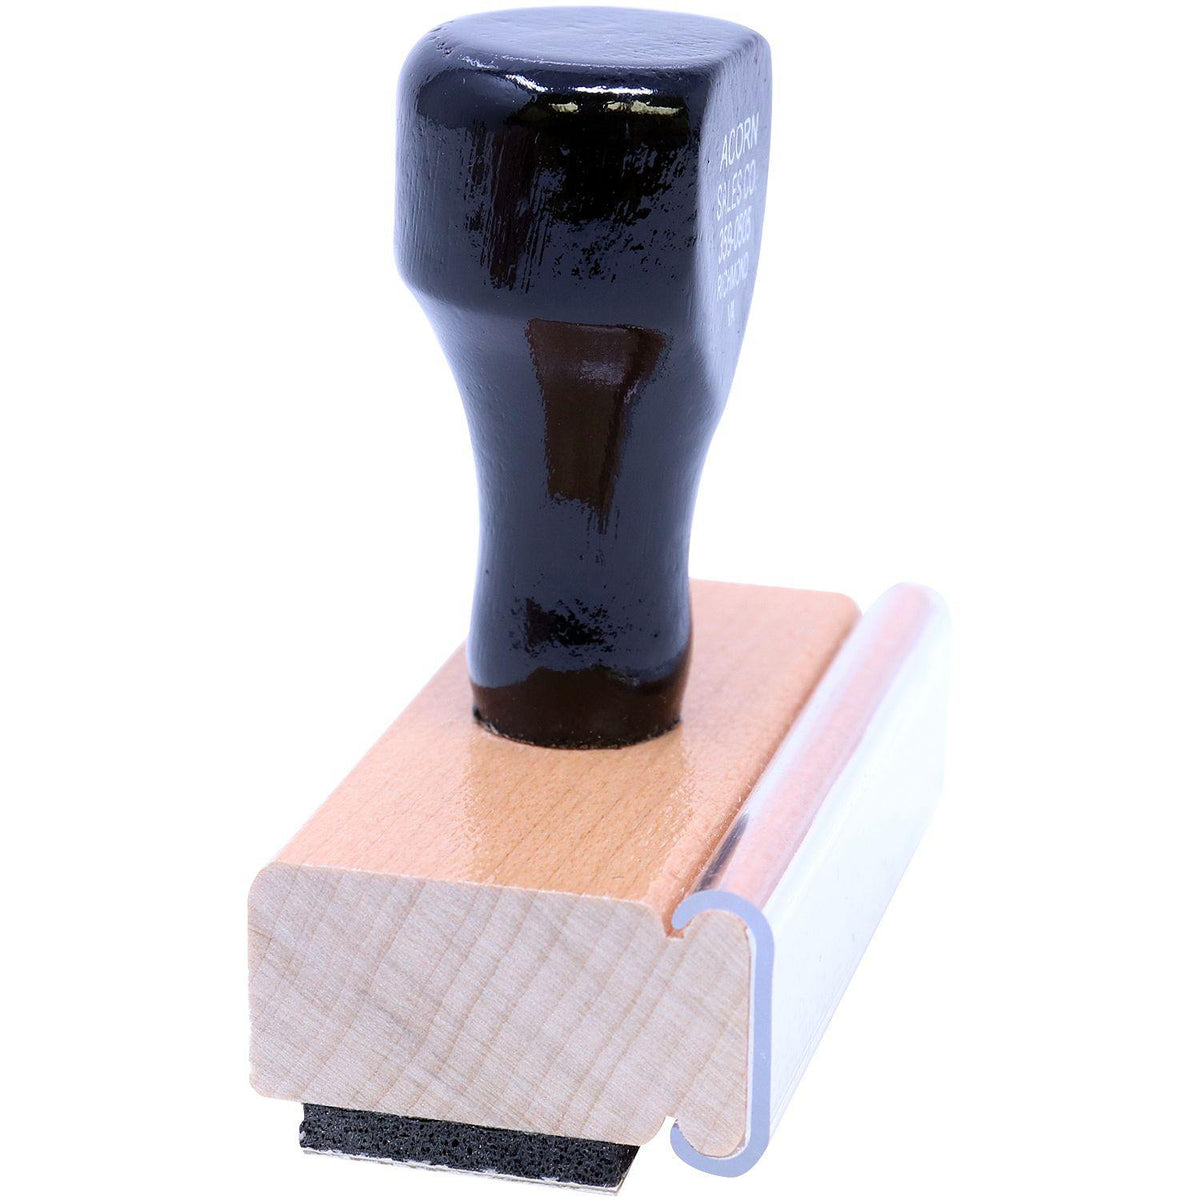 Nice Work Rubber Stamp - Engineer Seal Stamps - Brand_Acorn, Impression Size_Small, Stamp Type_Regular Stamp, Type of Use_Teacher